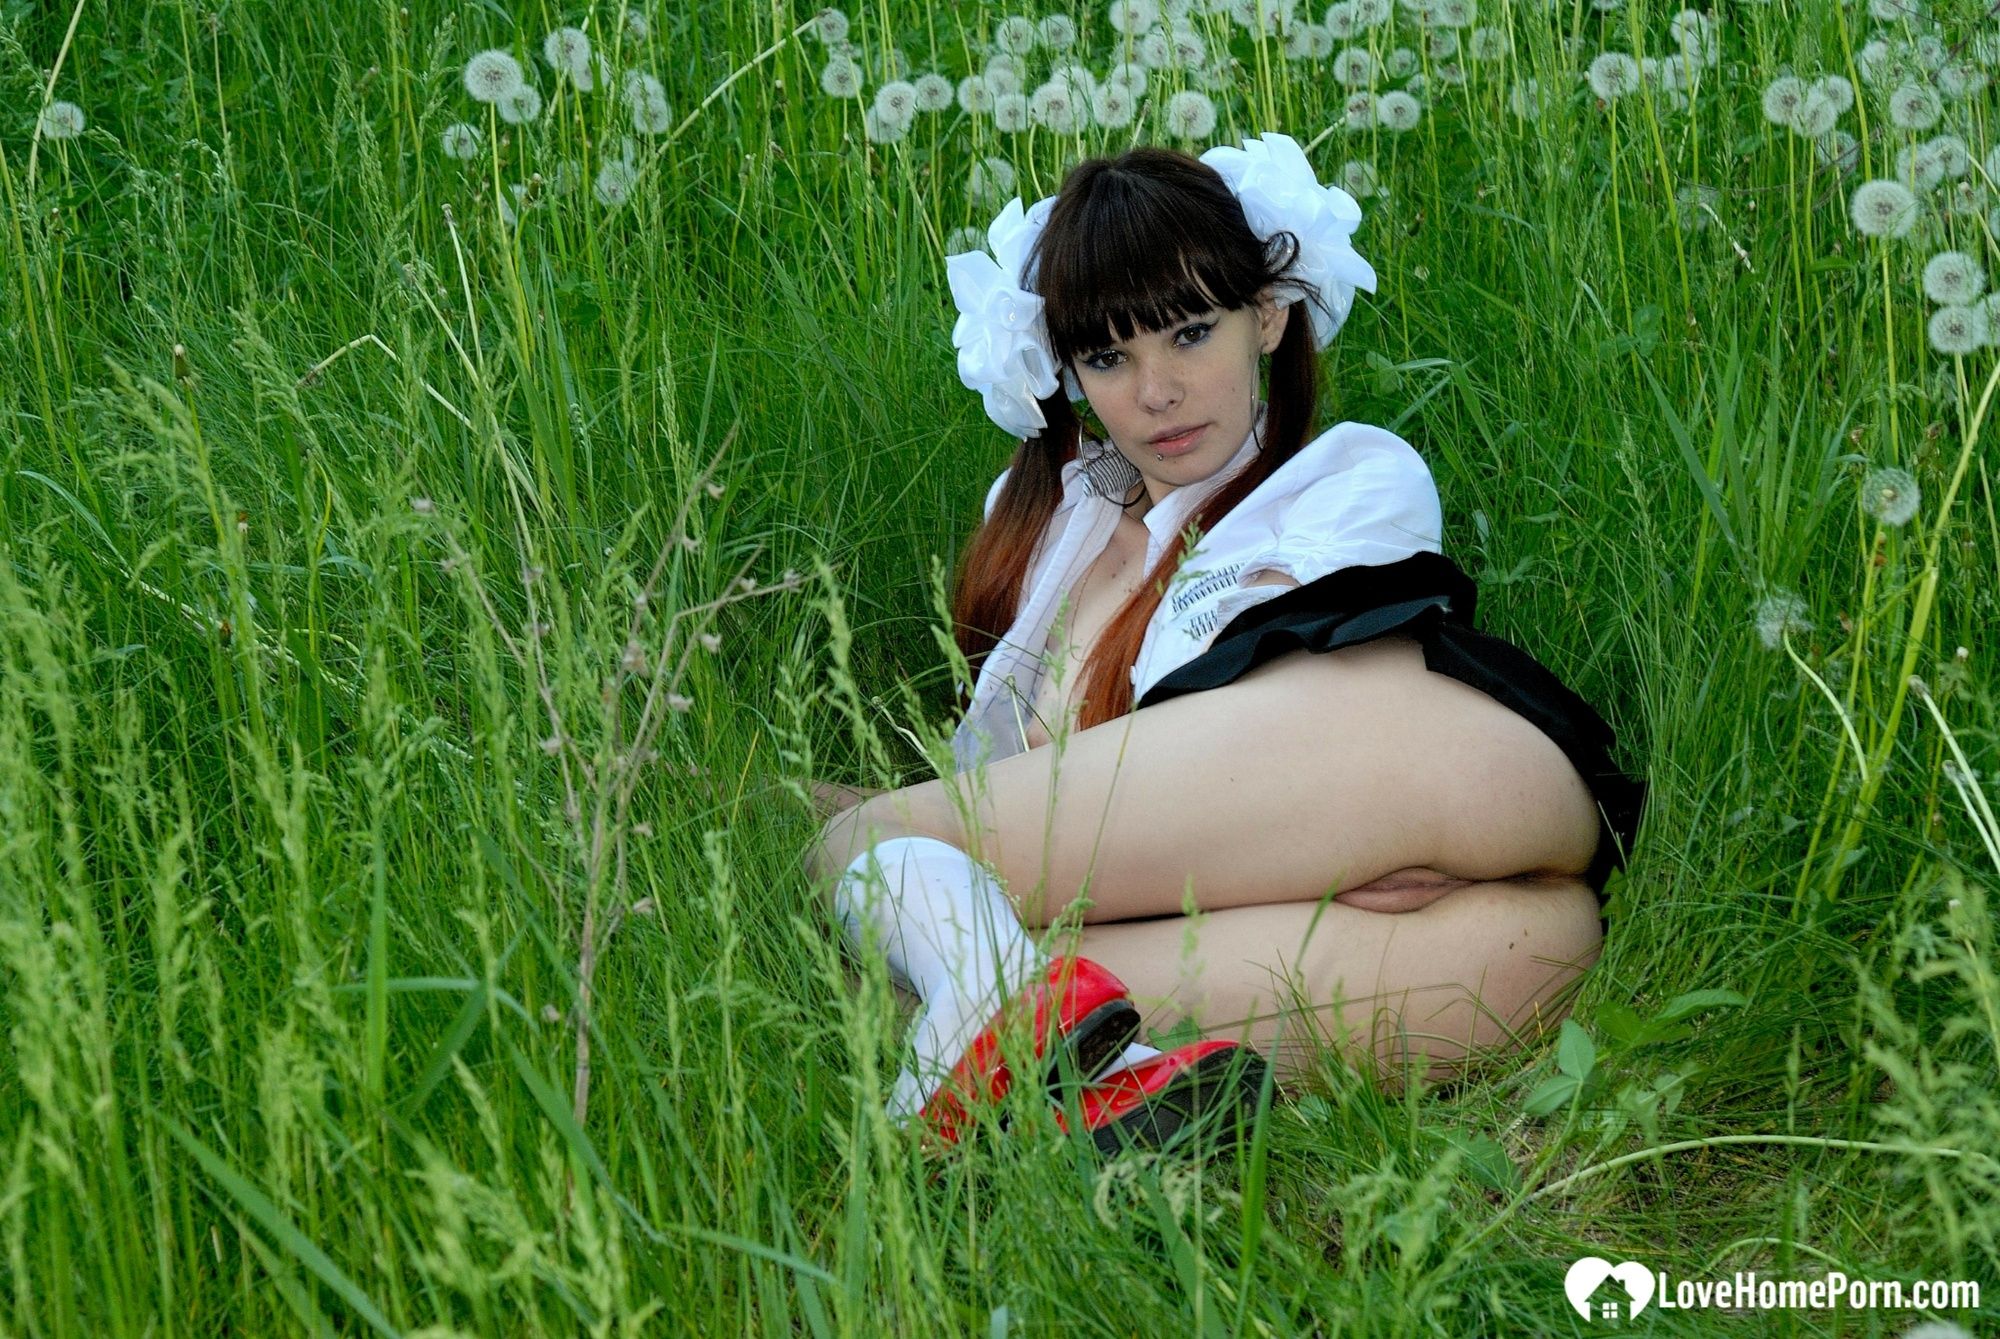 Schoolgirl turns a picnic into a teasing session #31